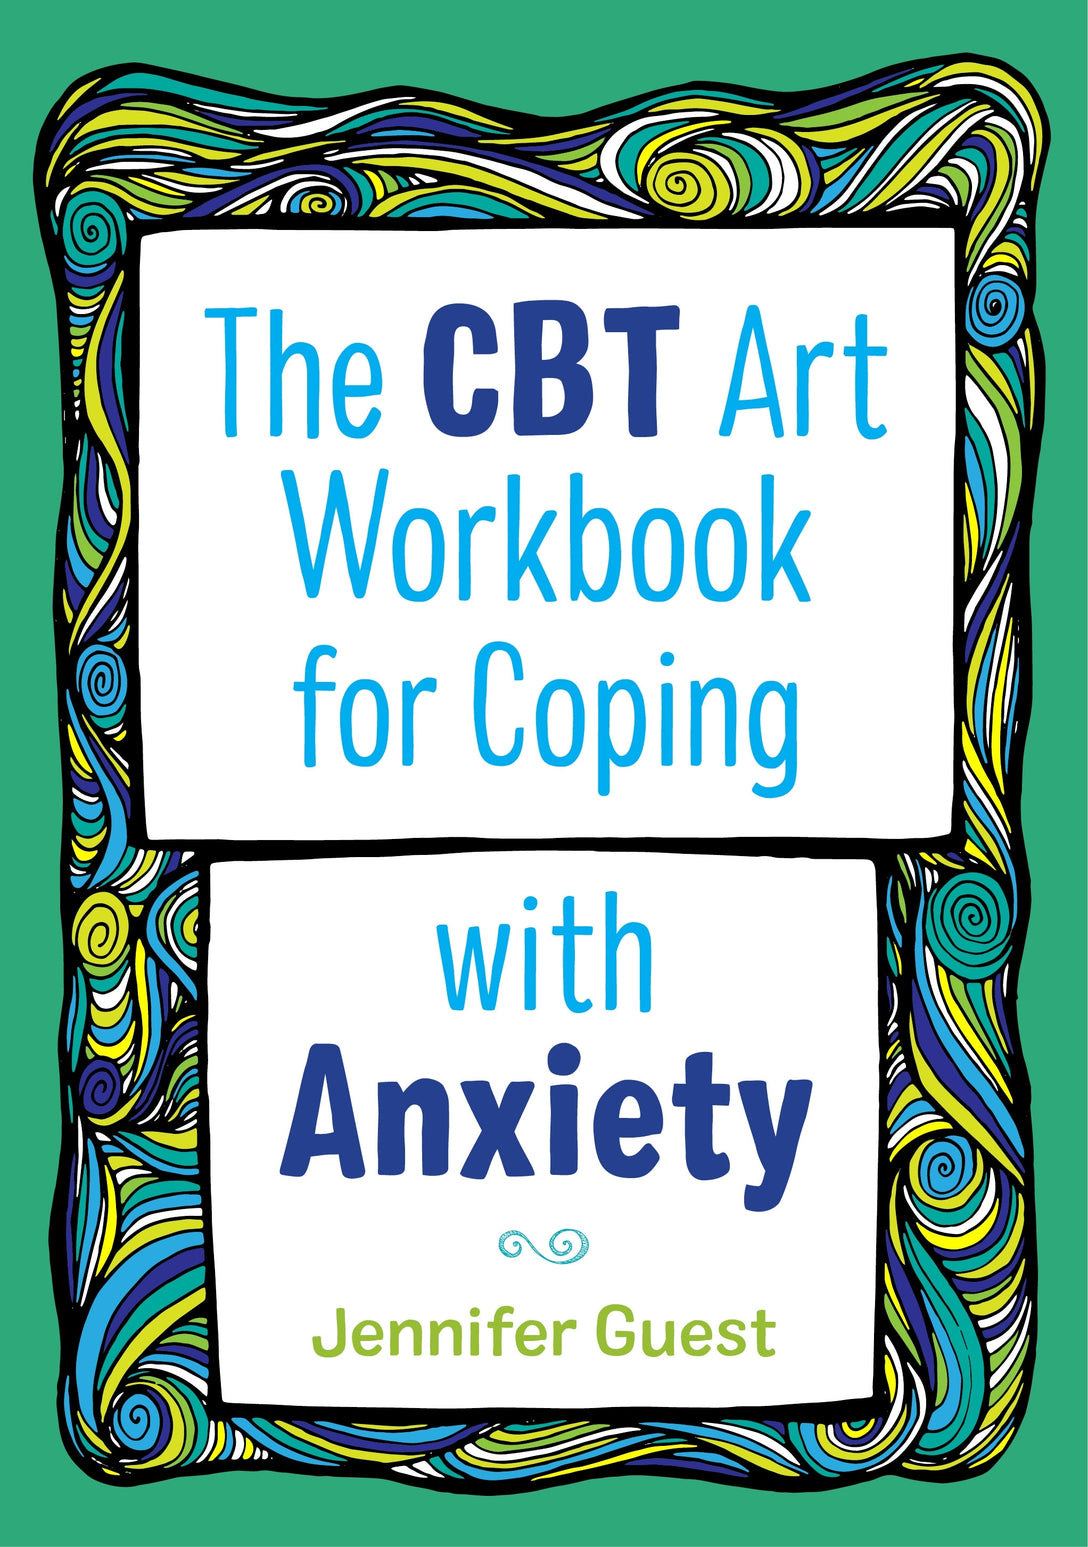 The CBT Art Workbook for Coping with Anxiety by Jennifer Guest